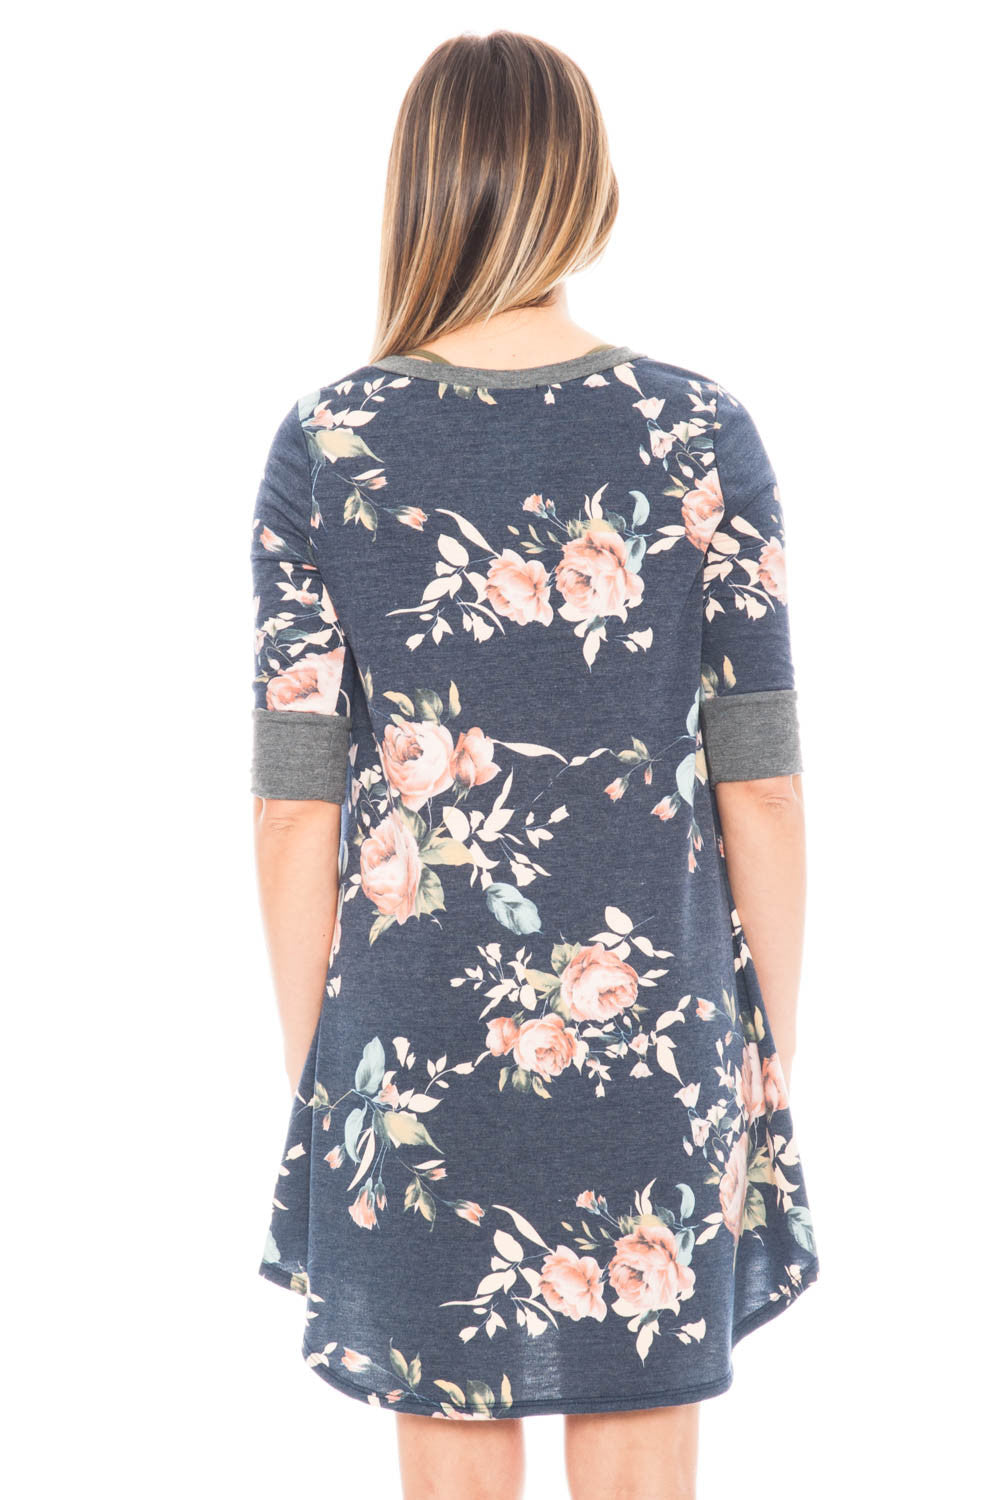 Dress - Floral Shift Dress with Pockets